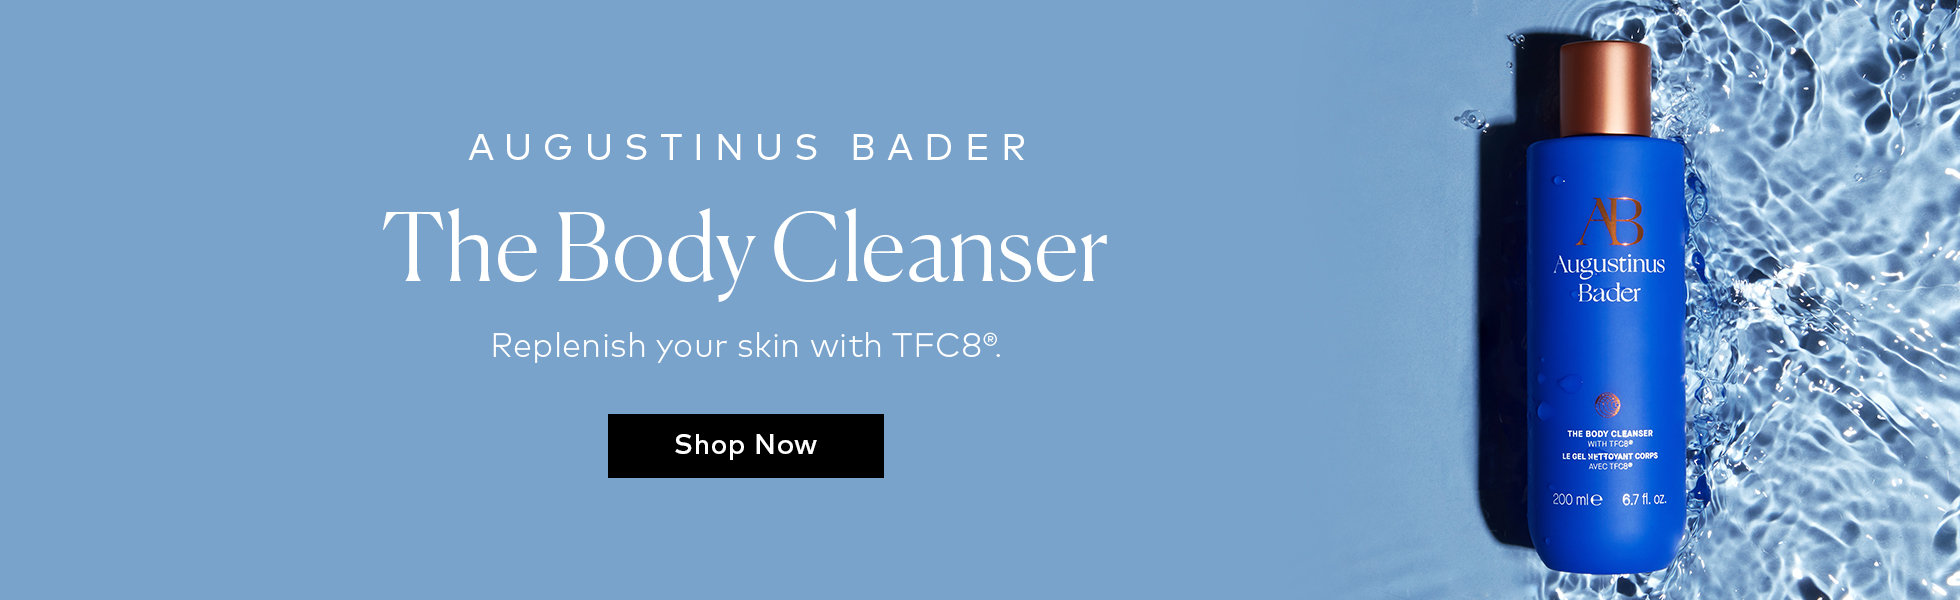 Shop the Augustinus Bader The Body Cleanser on Beautylish.com!